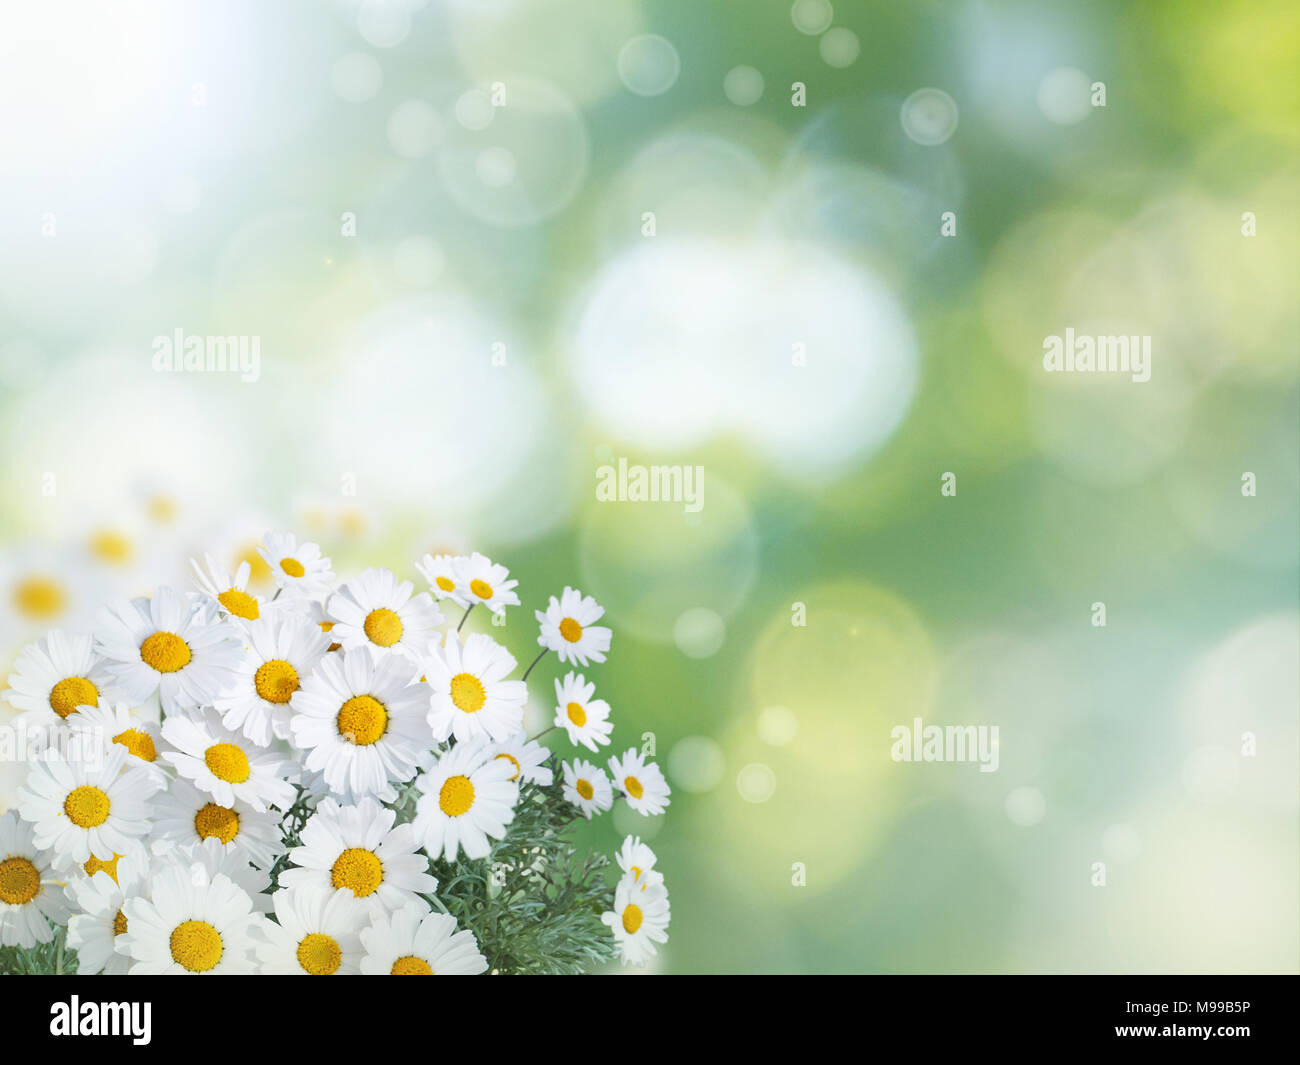 Daisy white yellow flowers on the summer blurred garden background Stock Photo